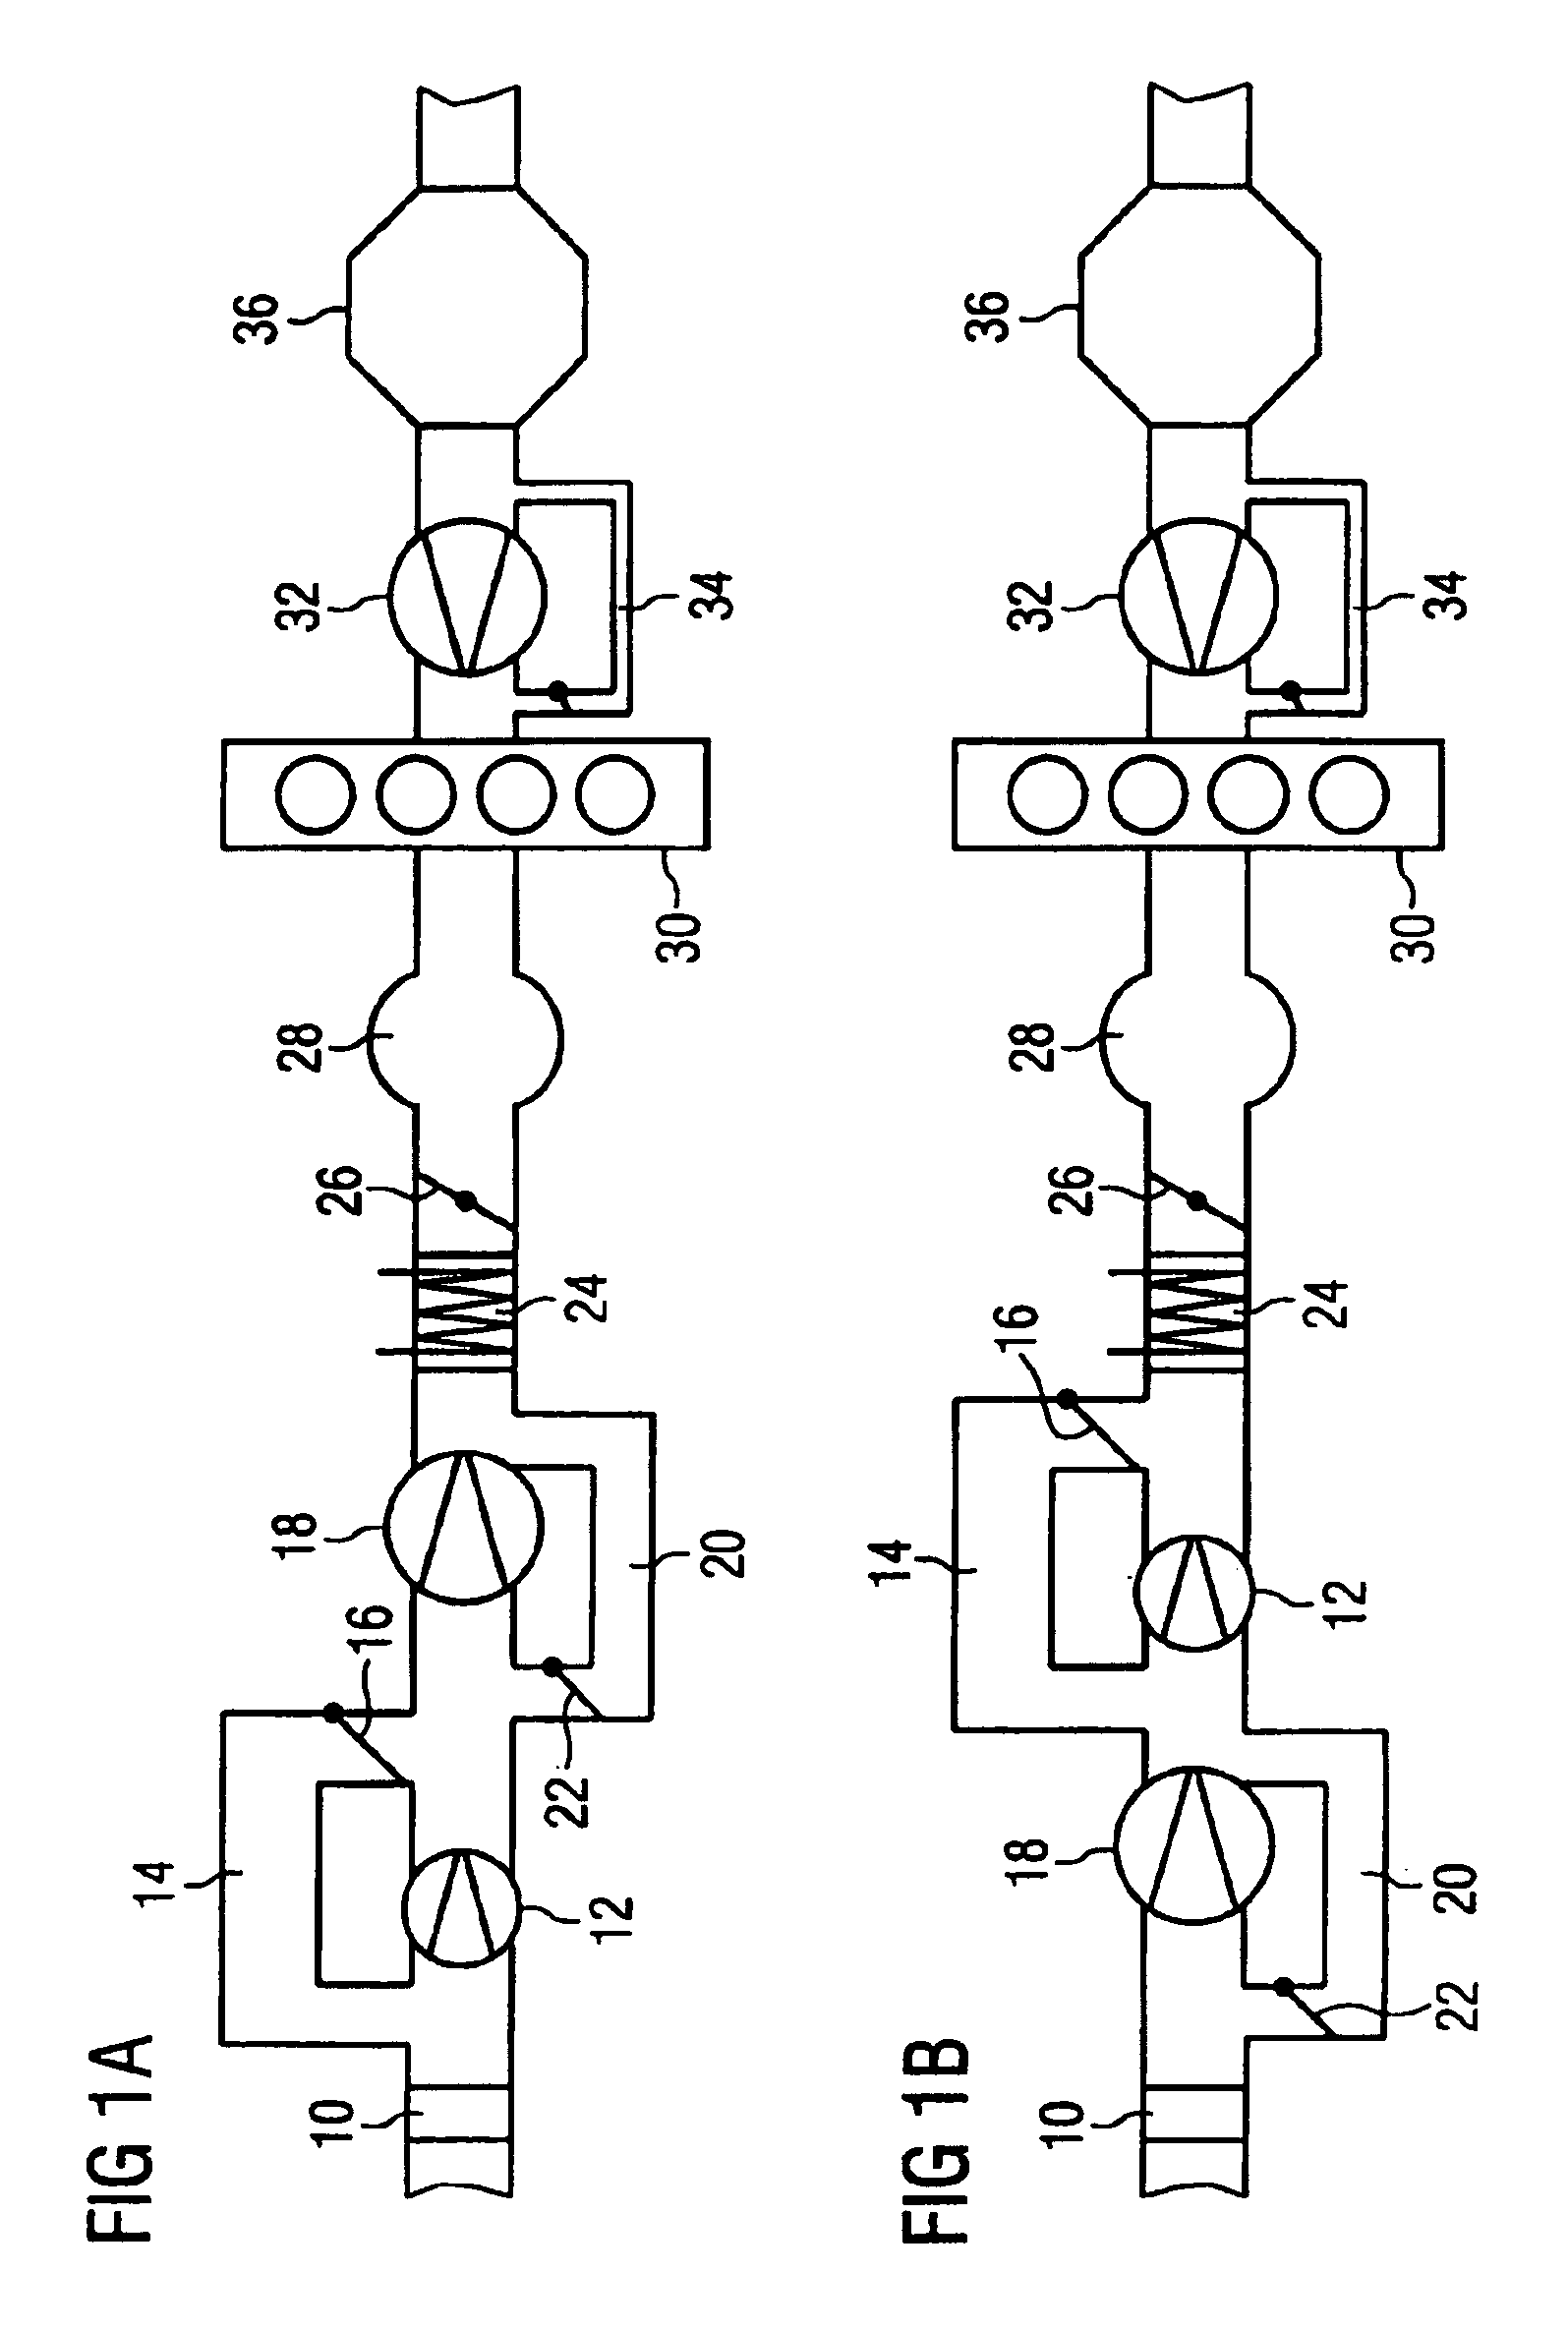 Method for controlling an electrically driven compressor